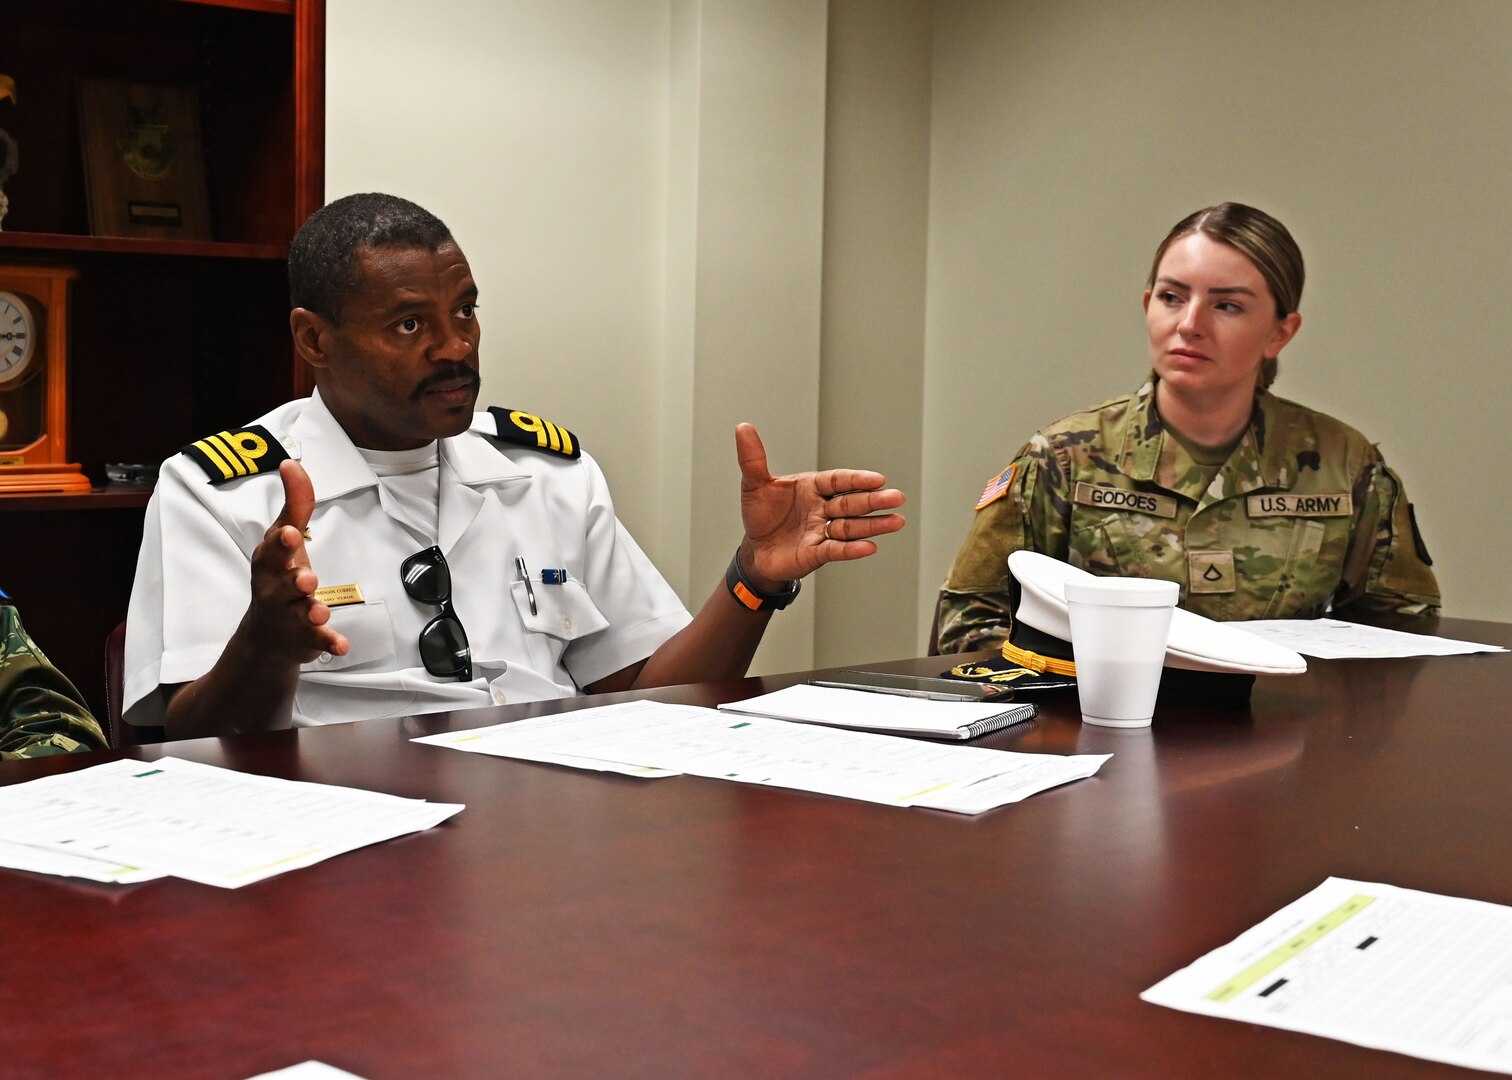 From left, Lt. Col. Domingos Correia, national director of defense for Cabo Verde, and Pfc. Stefane Godoes de Souza, an interpreter with the 197th Field Artillery Brigade, meet with NHARNG aviators during a state partnership exchange July 11, 2023, at the Army Aviation Support Facility in Concord, New Hampshire.